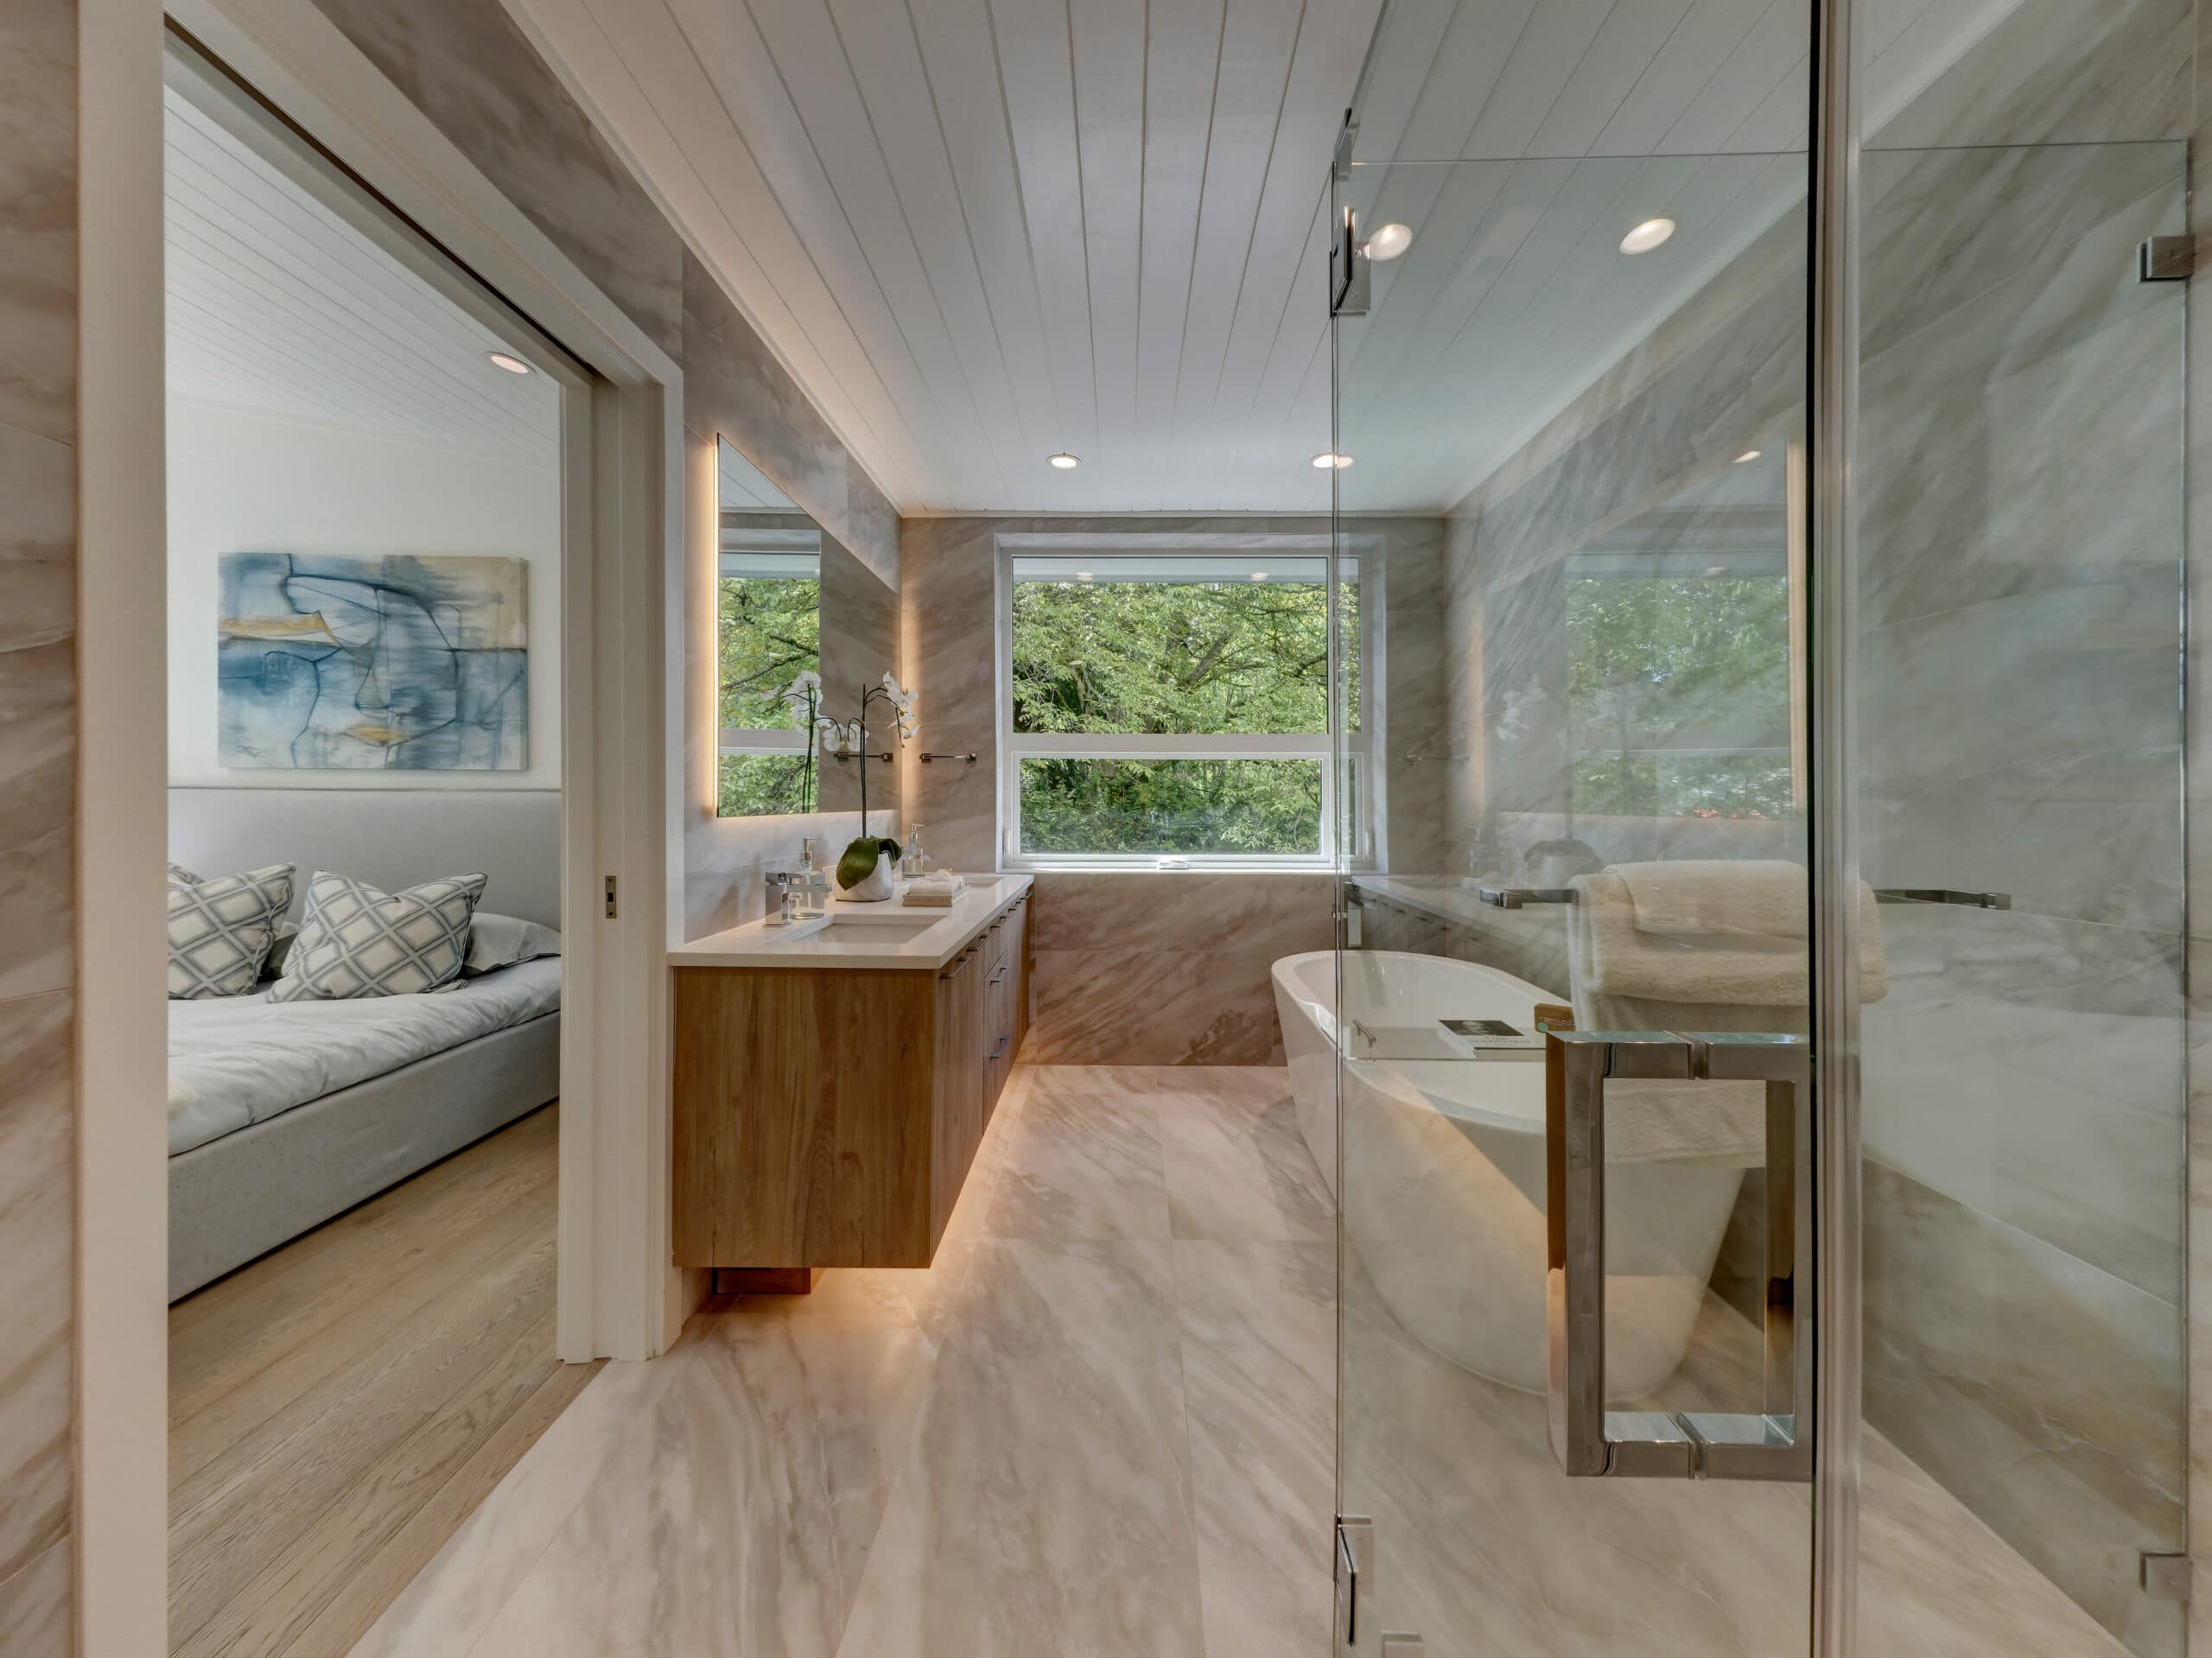 A modern Canadian Home style bathroom featuring a glass shower.